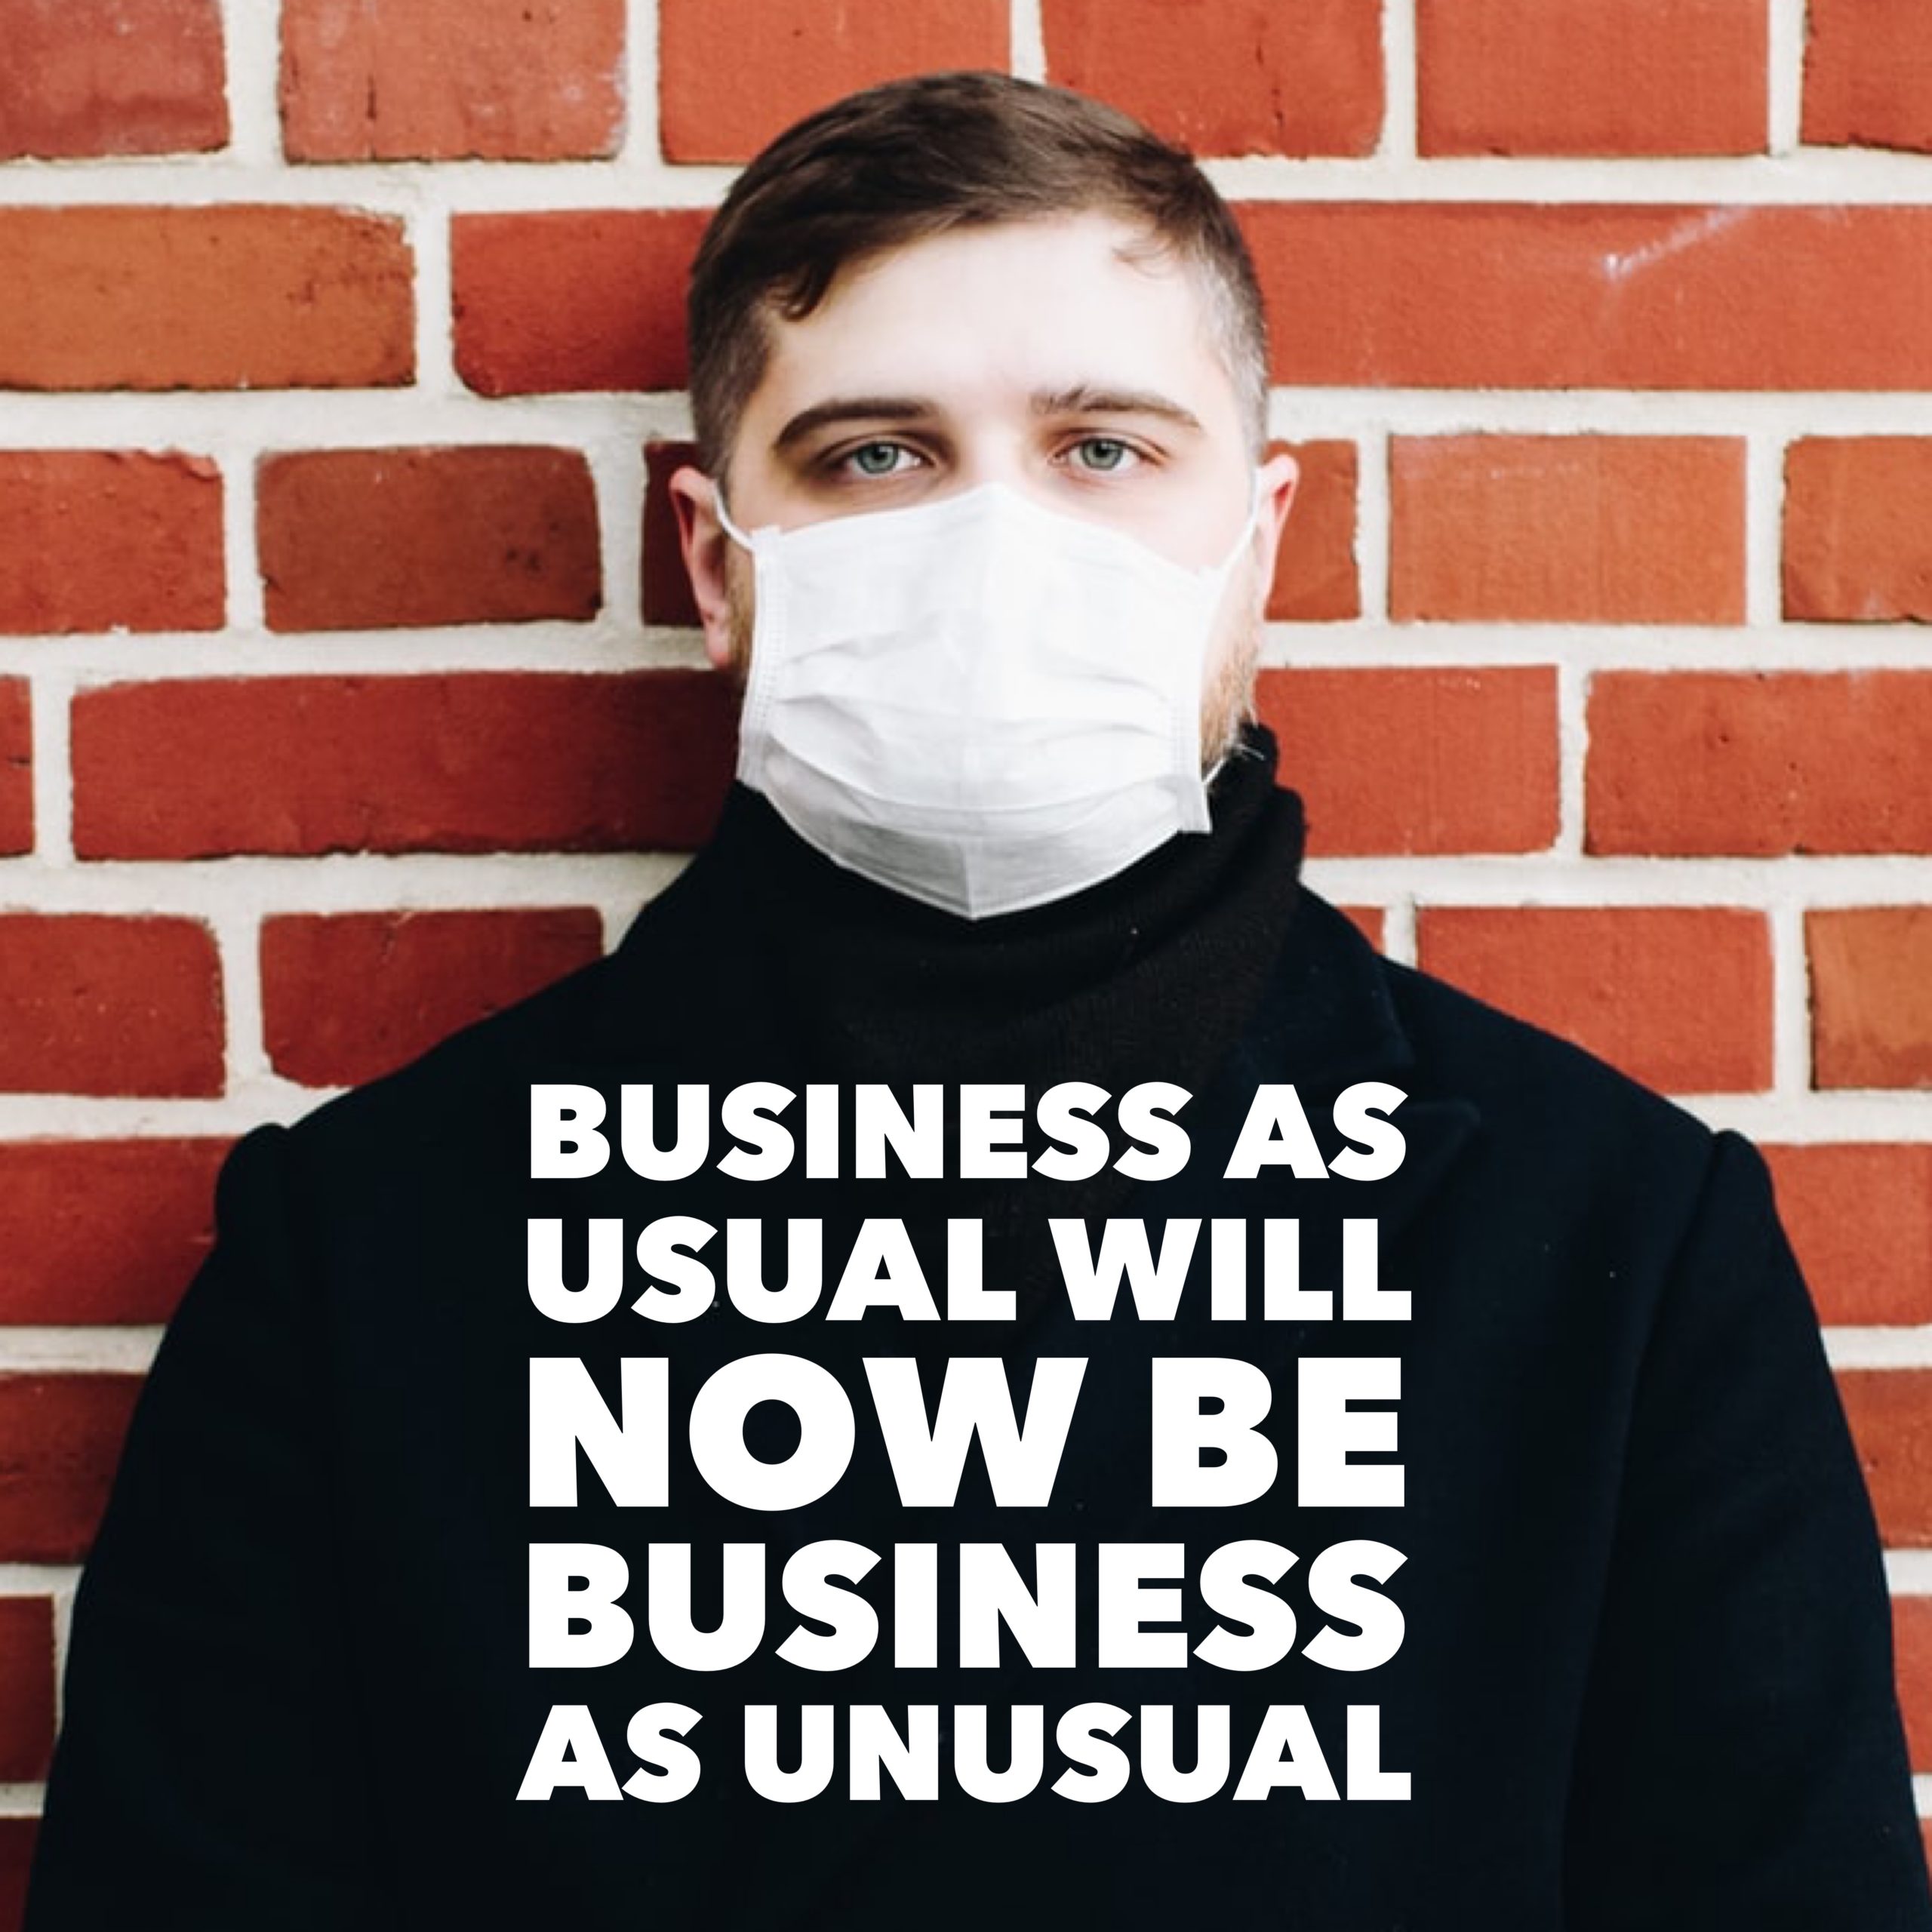 Business as Usual Will Now be Business as Unusual.